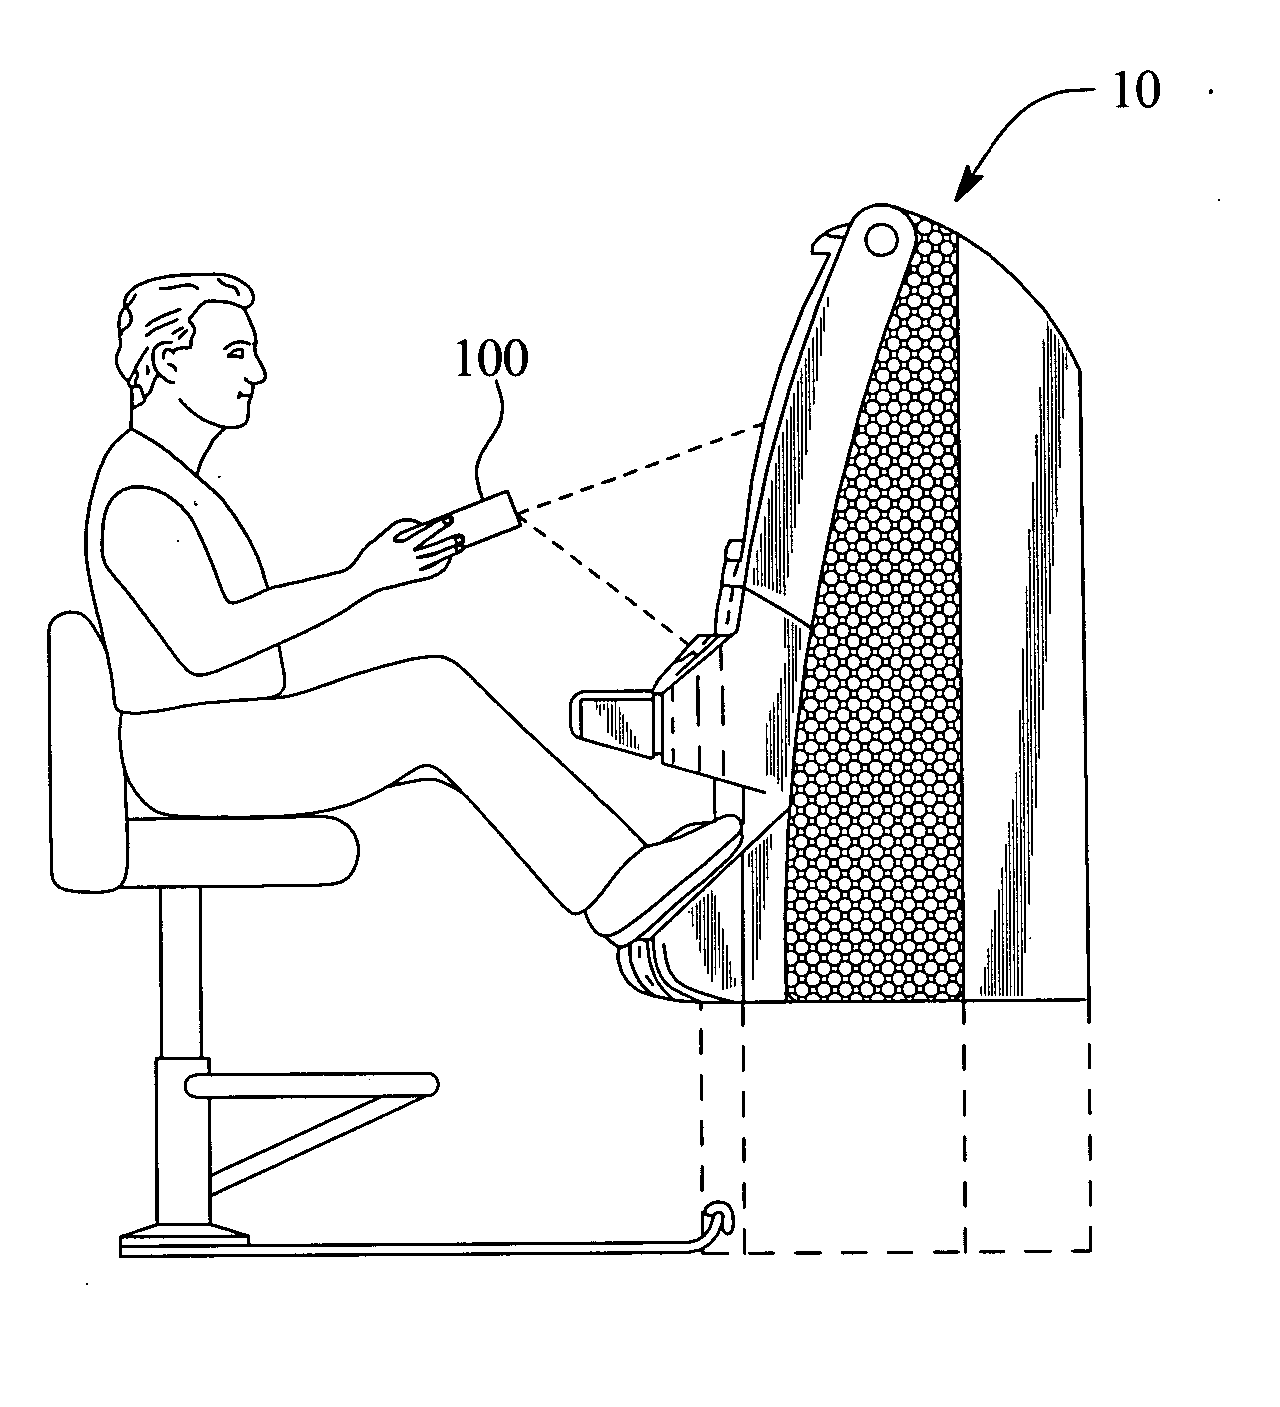 Wireless operation of a game device